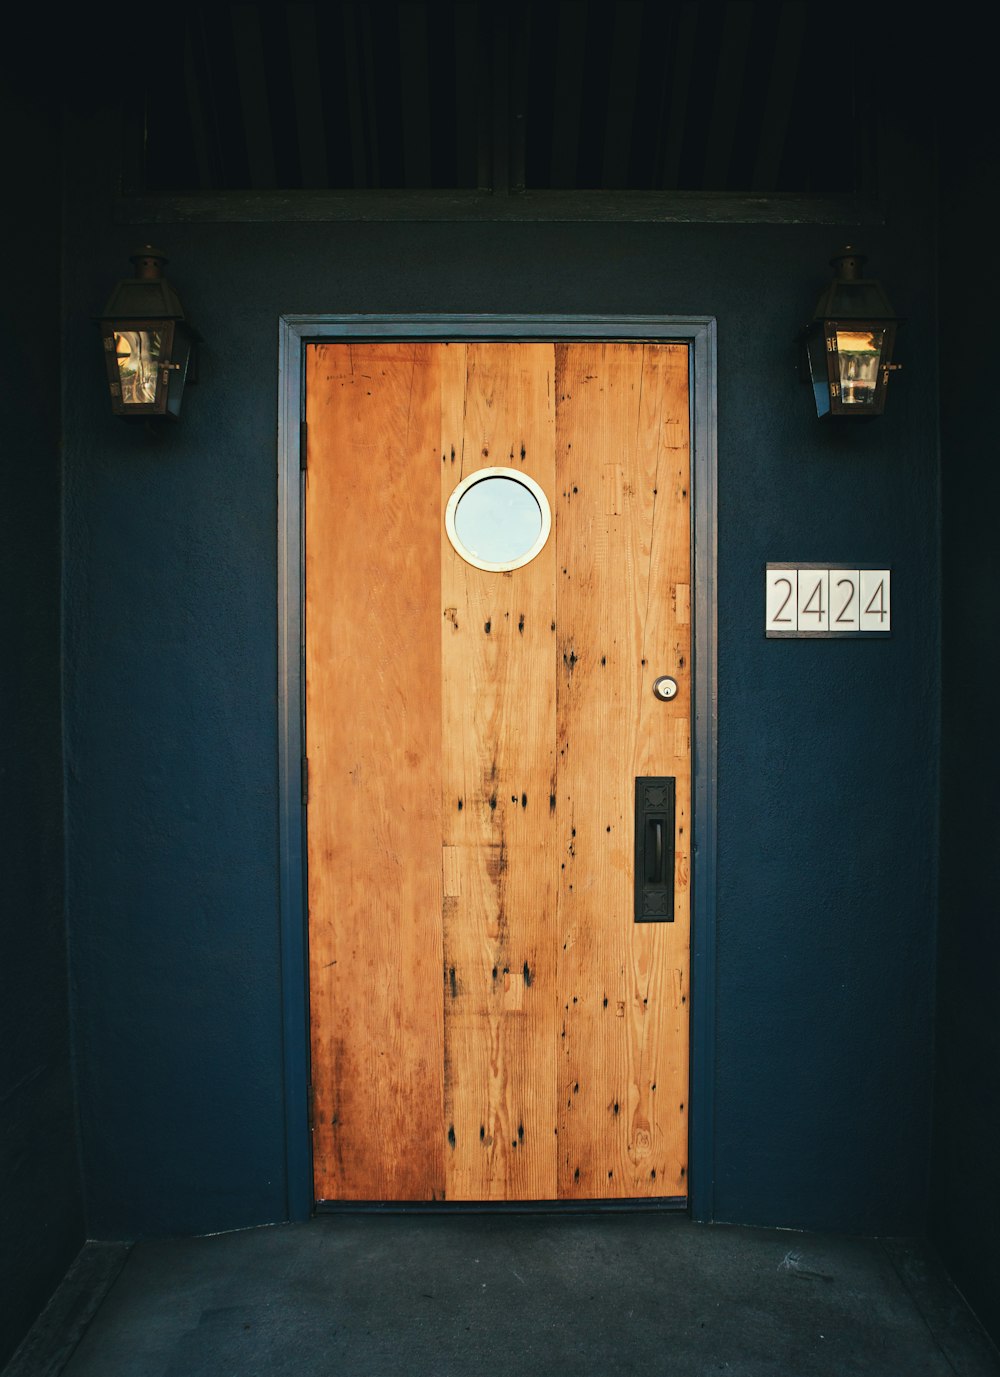 brown wooden door with black and white wall mounted device